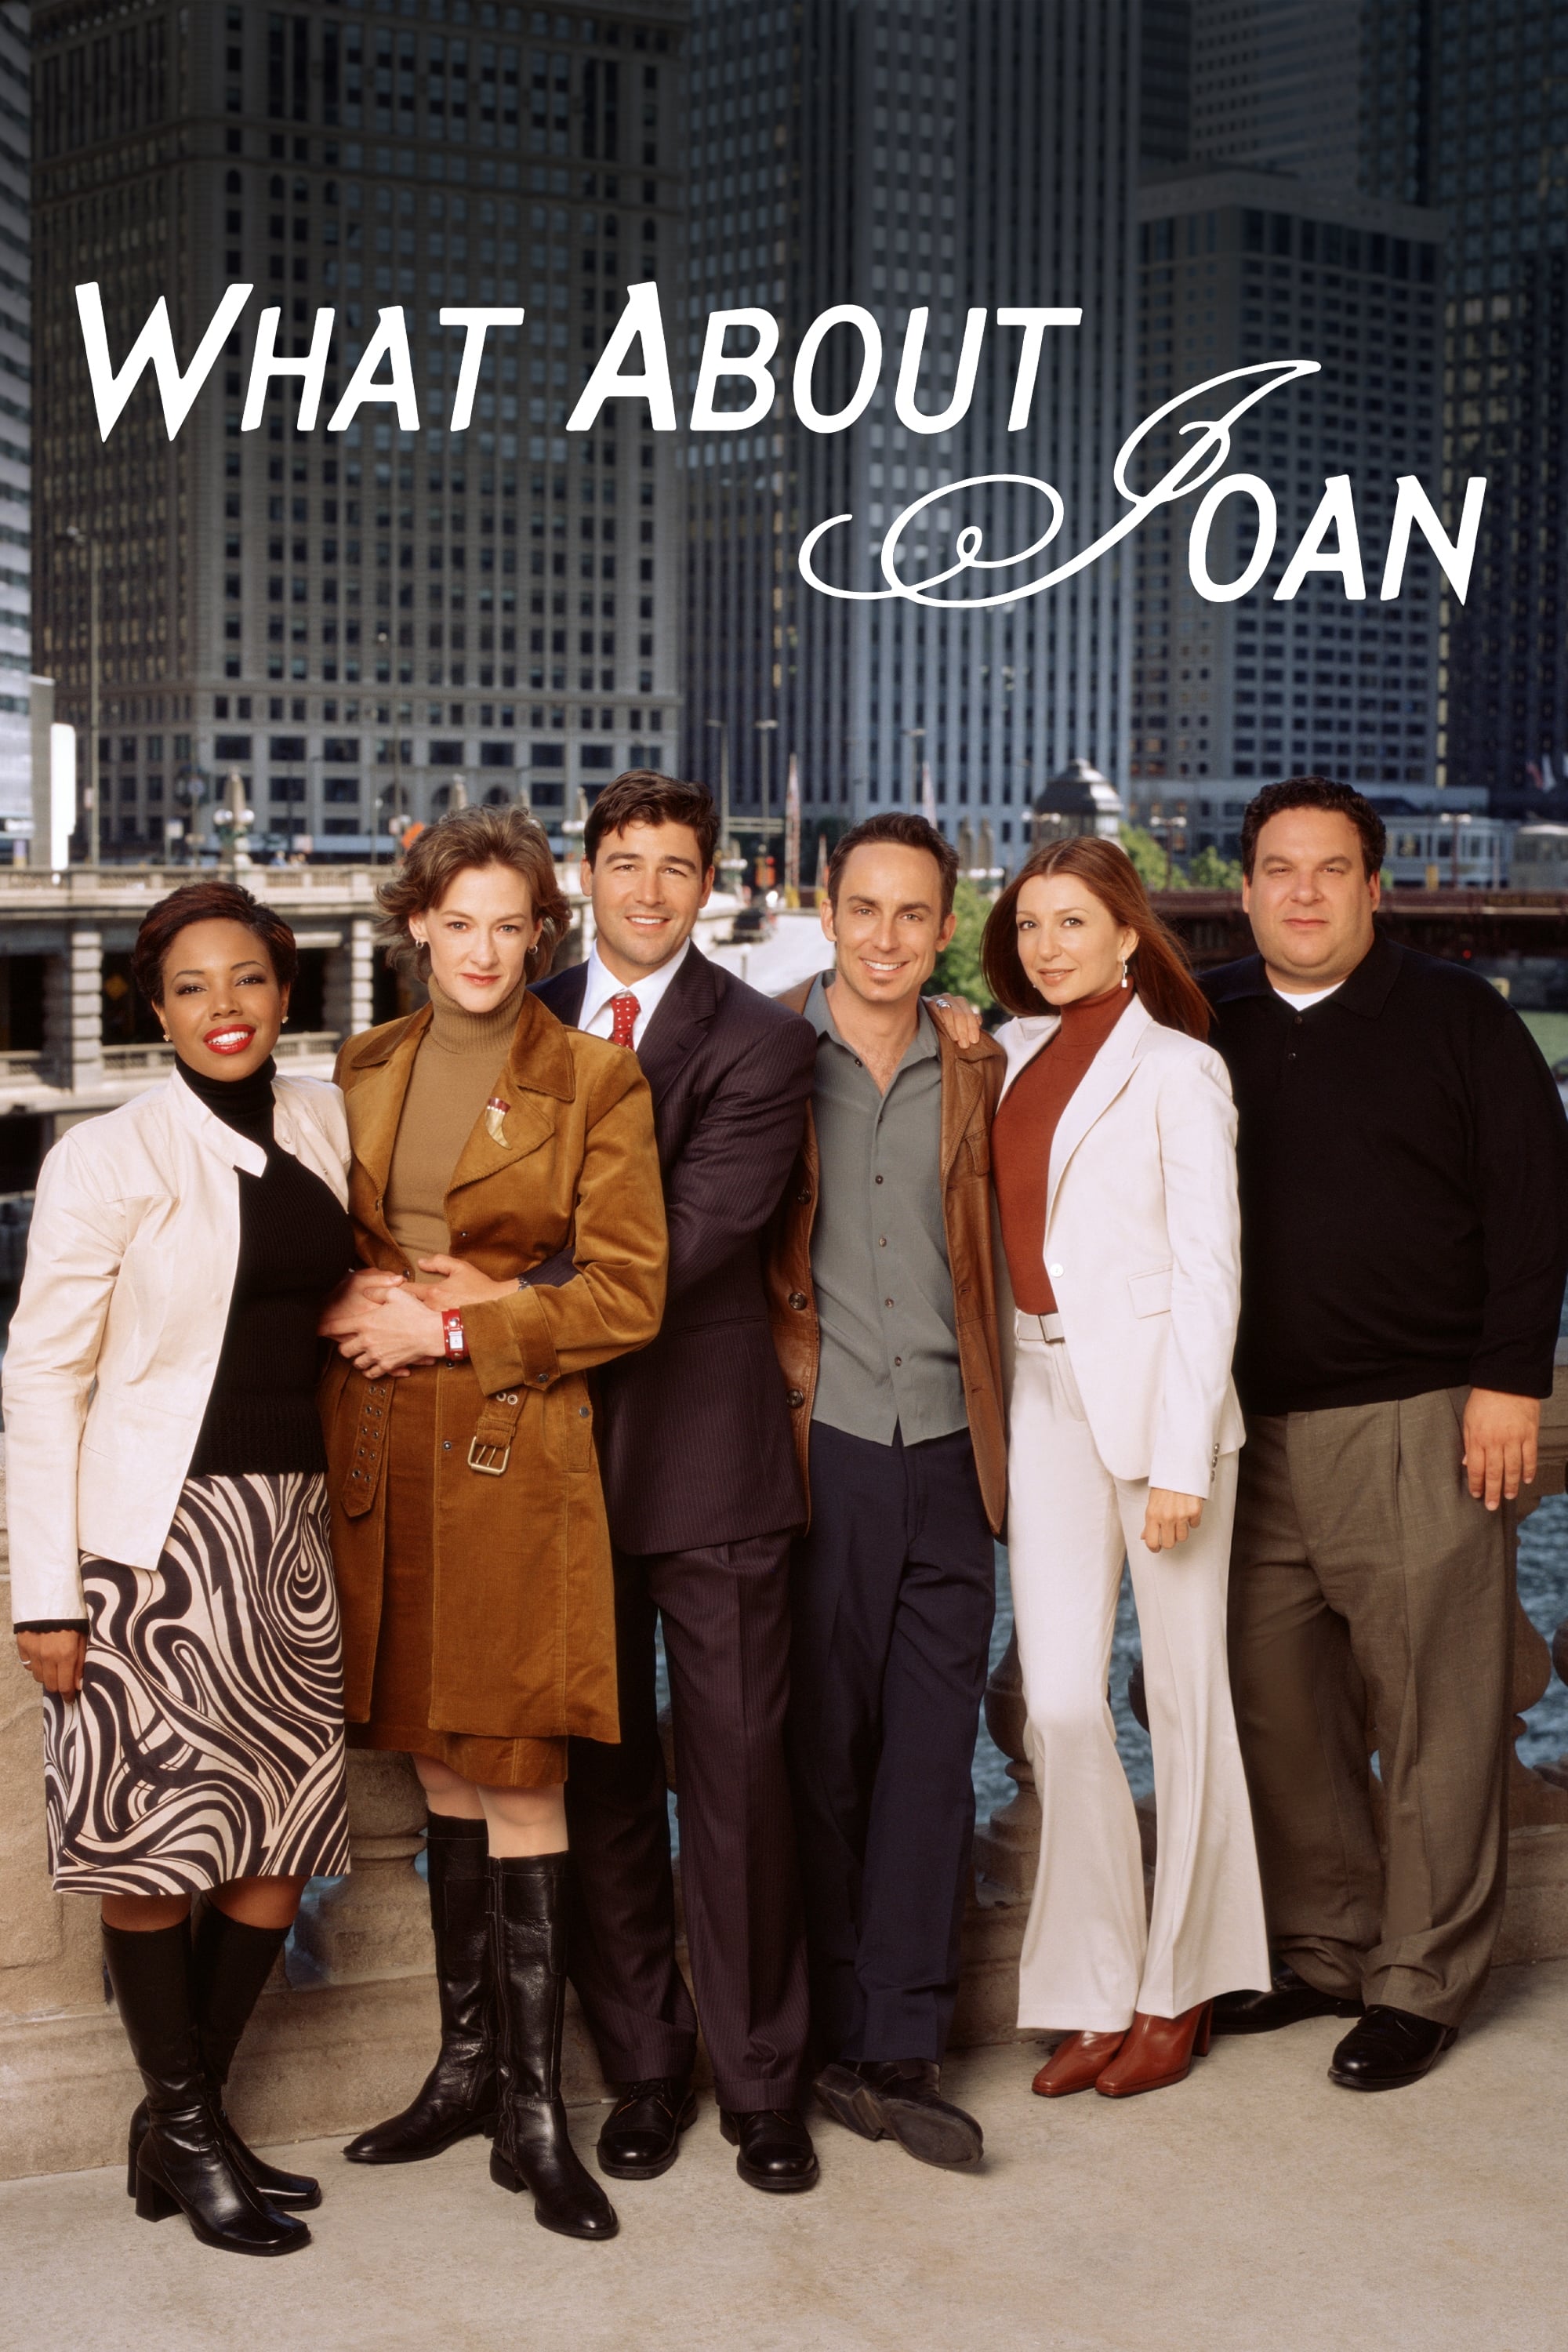 What About Joan? (2001)